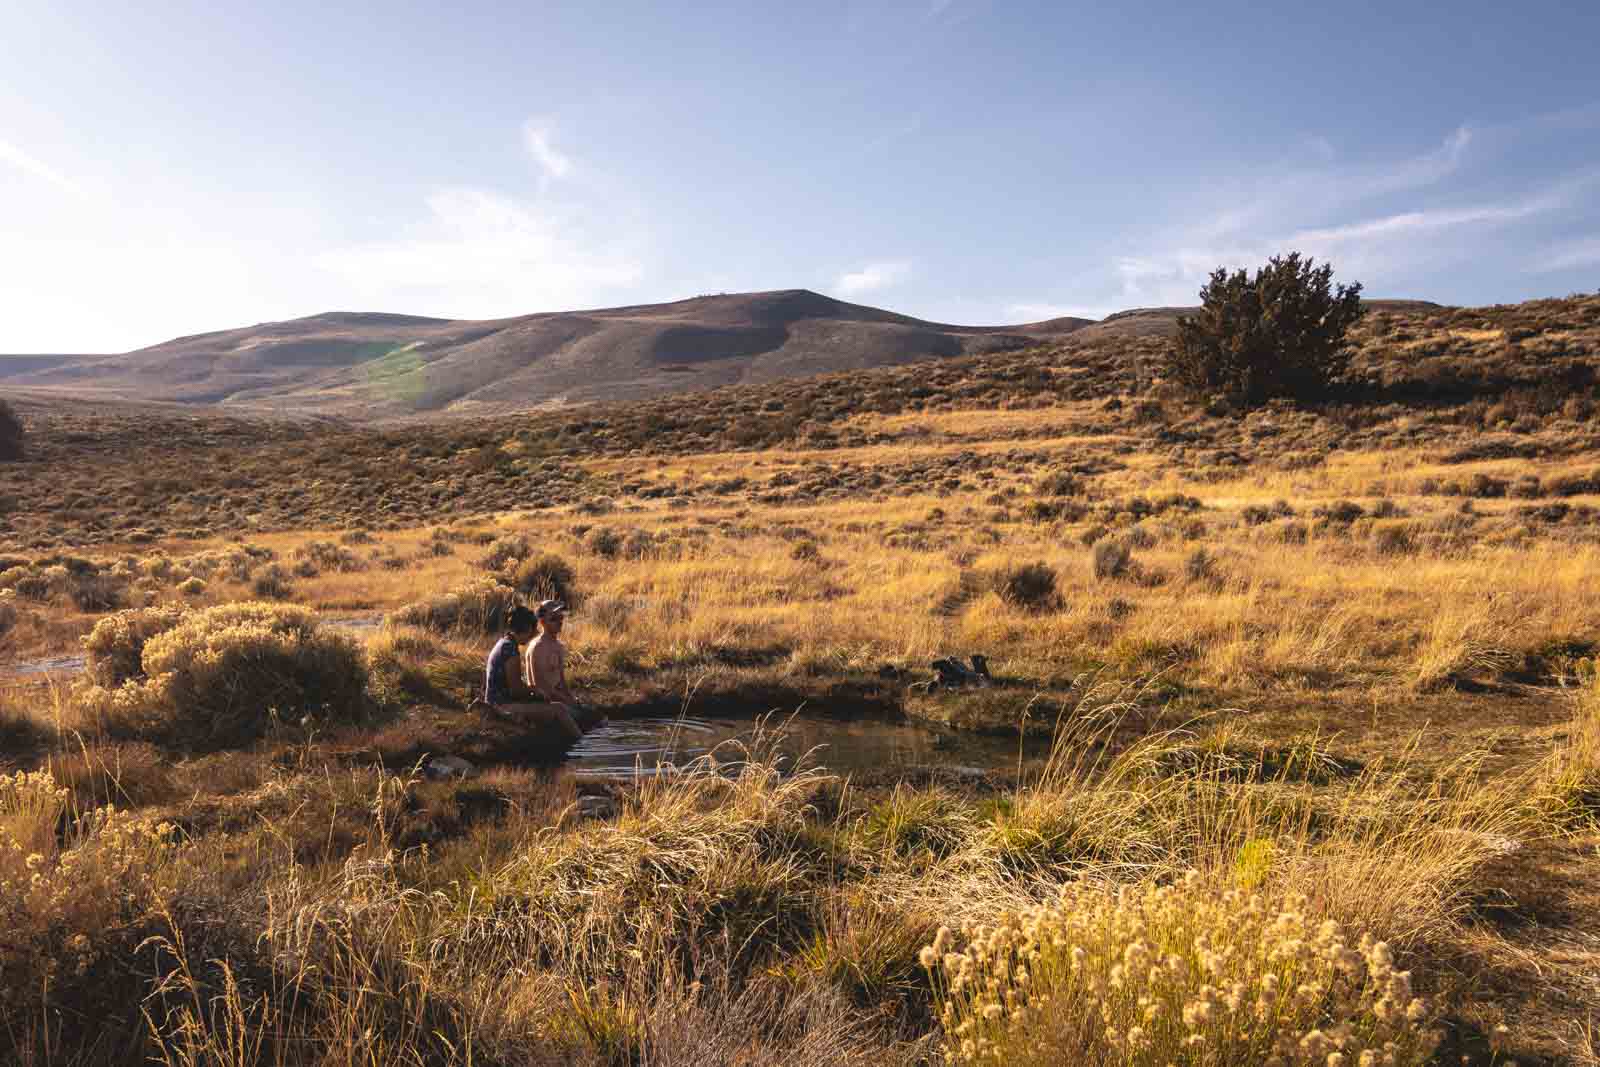 Two people bathing inside the natural Hart Mountain Hot Spring with views across the meadow and hills.